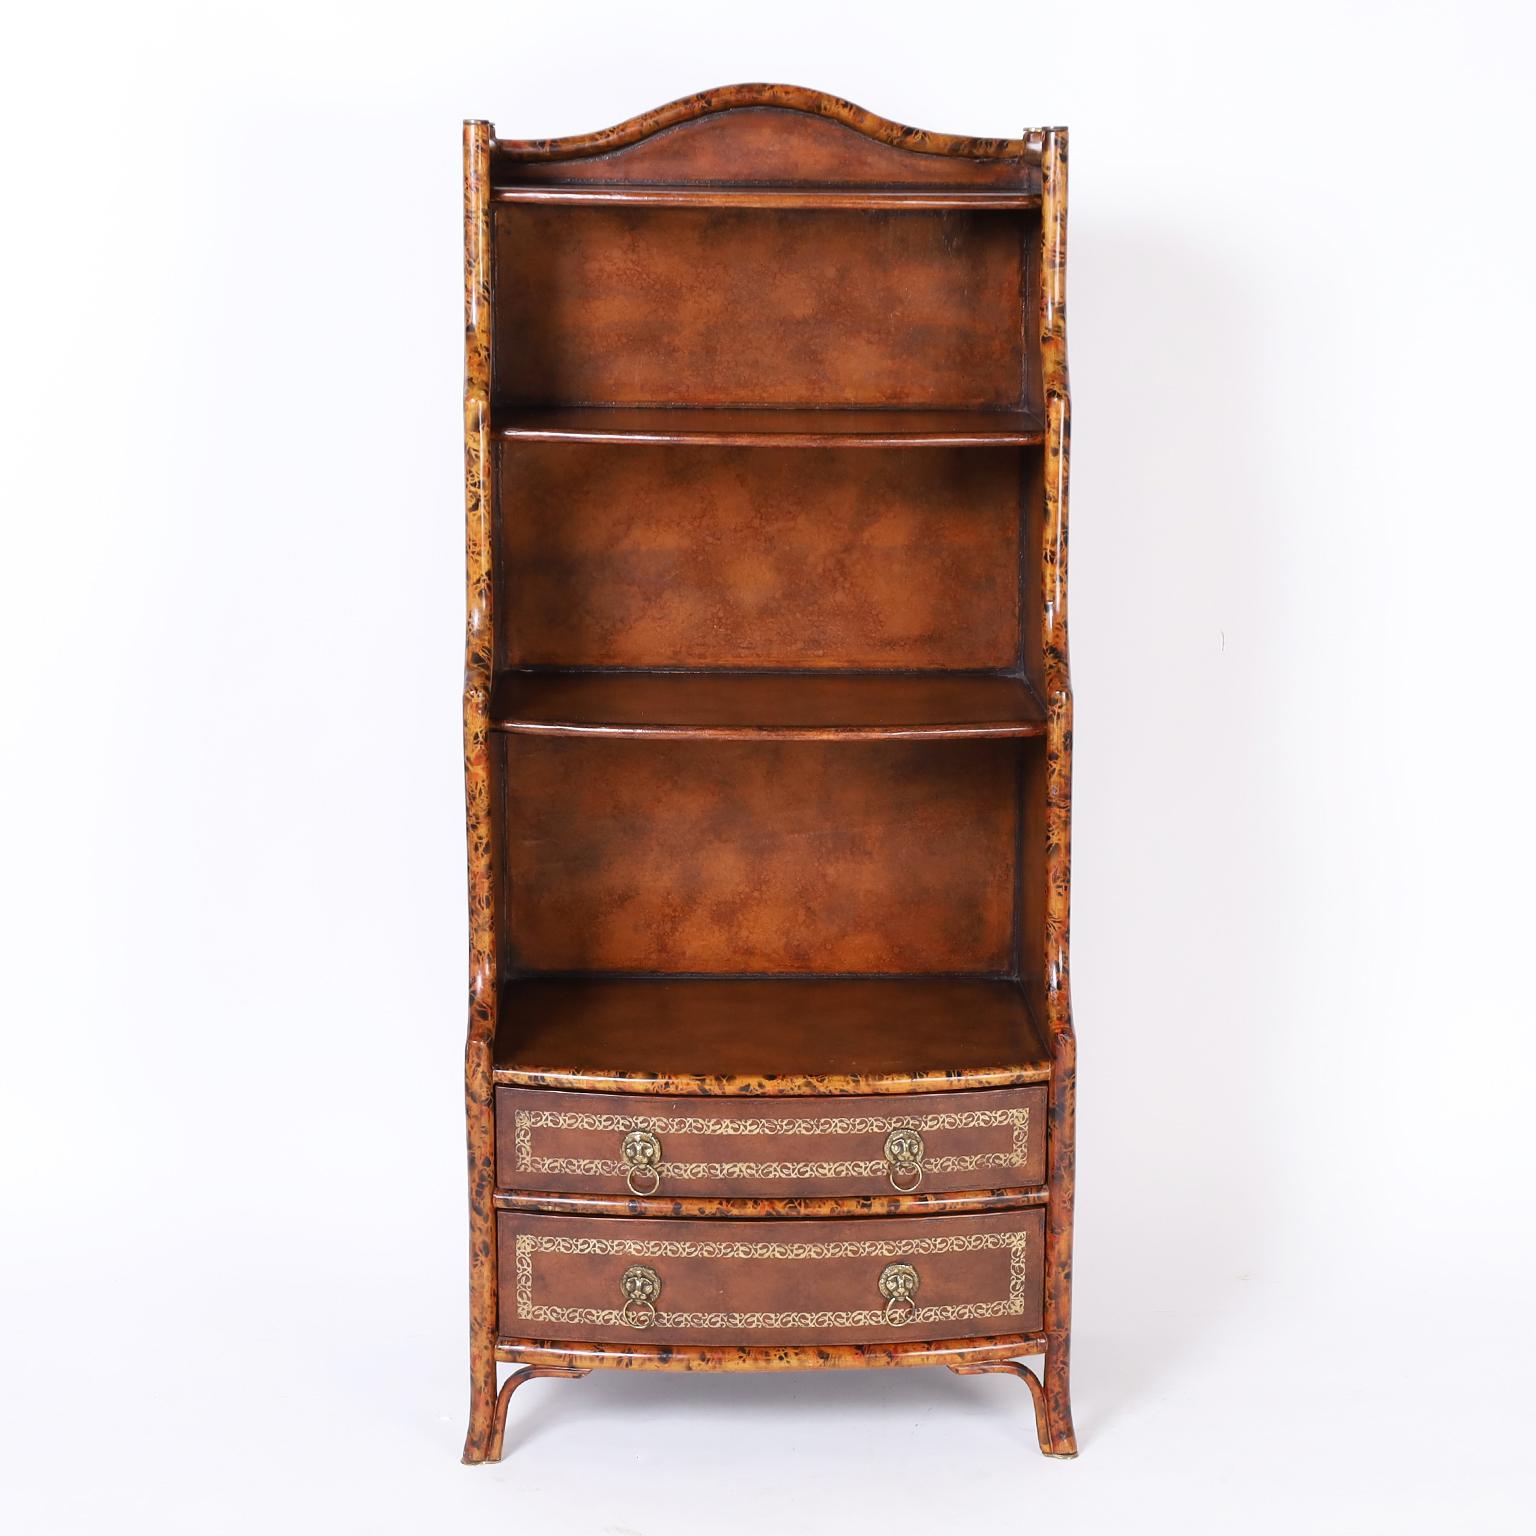 British colonial style bookcase or etagere featuring a faux bamboo frame, tooled leather panels on the sides, shelves, and drawer fronts having classic lion head hardware. Attributed to Maitland-Smith.